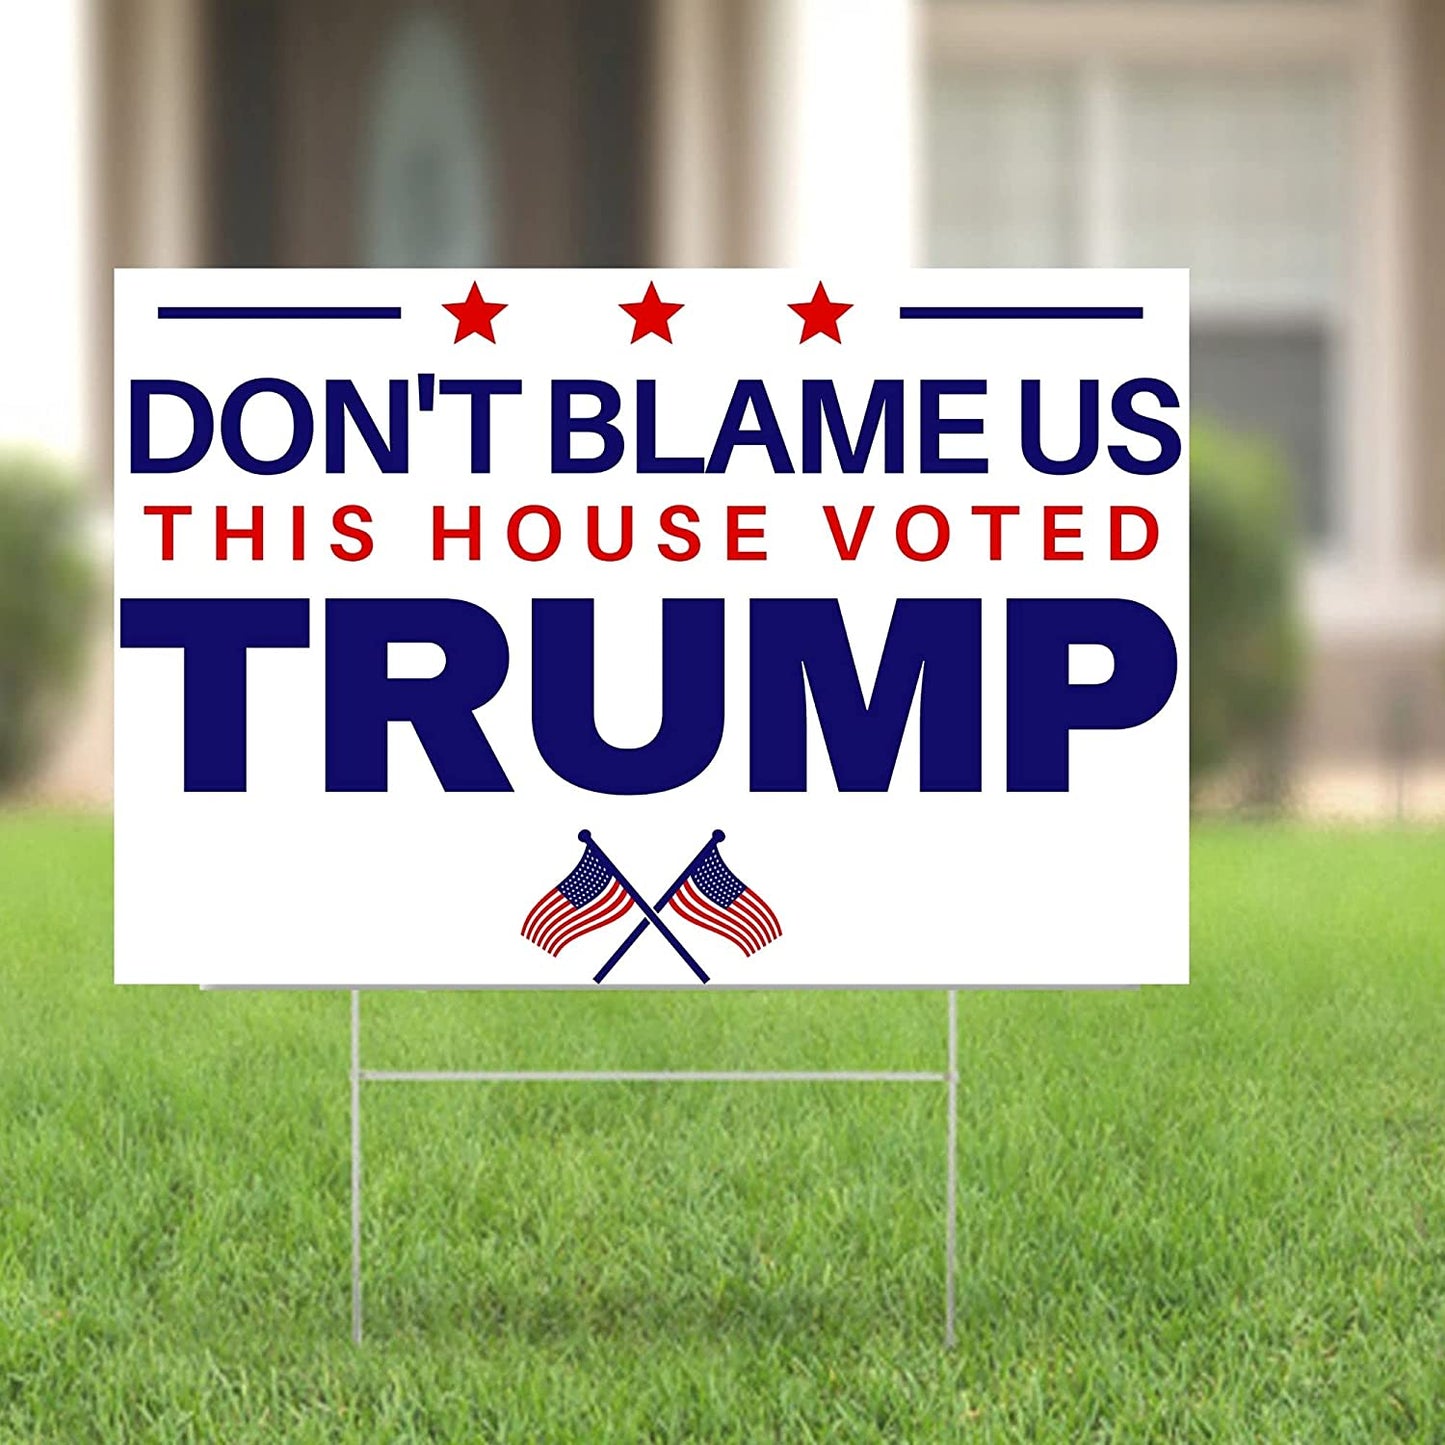 Don't Blame Us This House Voted Trump 18"x12" Double-Sided Yard Sign